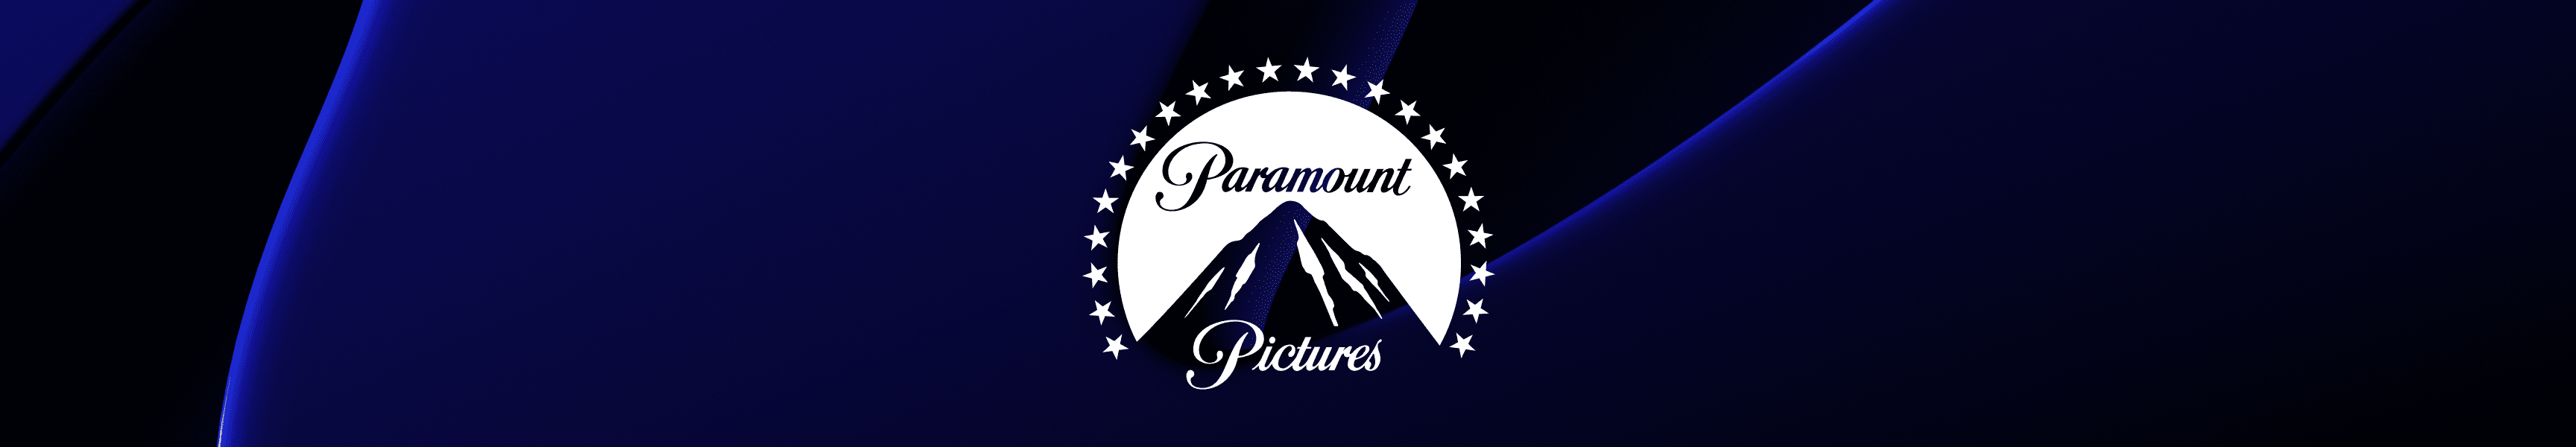 Paramount Pictures Juguetes